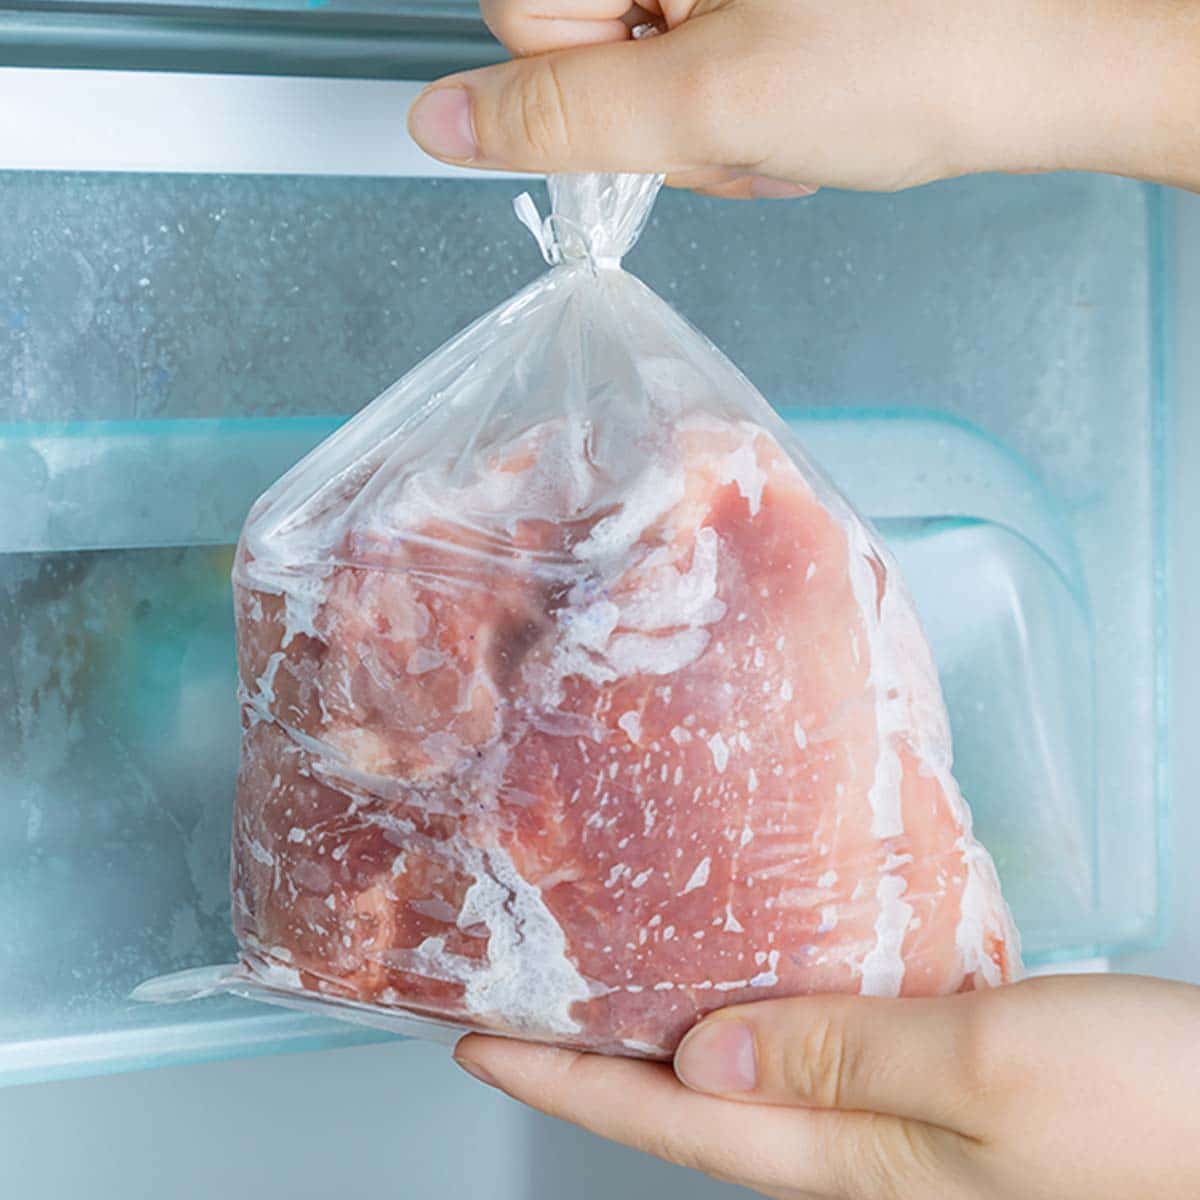 This method involves completely submerging the chicken in a bowl of cold water. By the way, whenever you use water to defrost food, it should be potable (safe to drink).